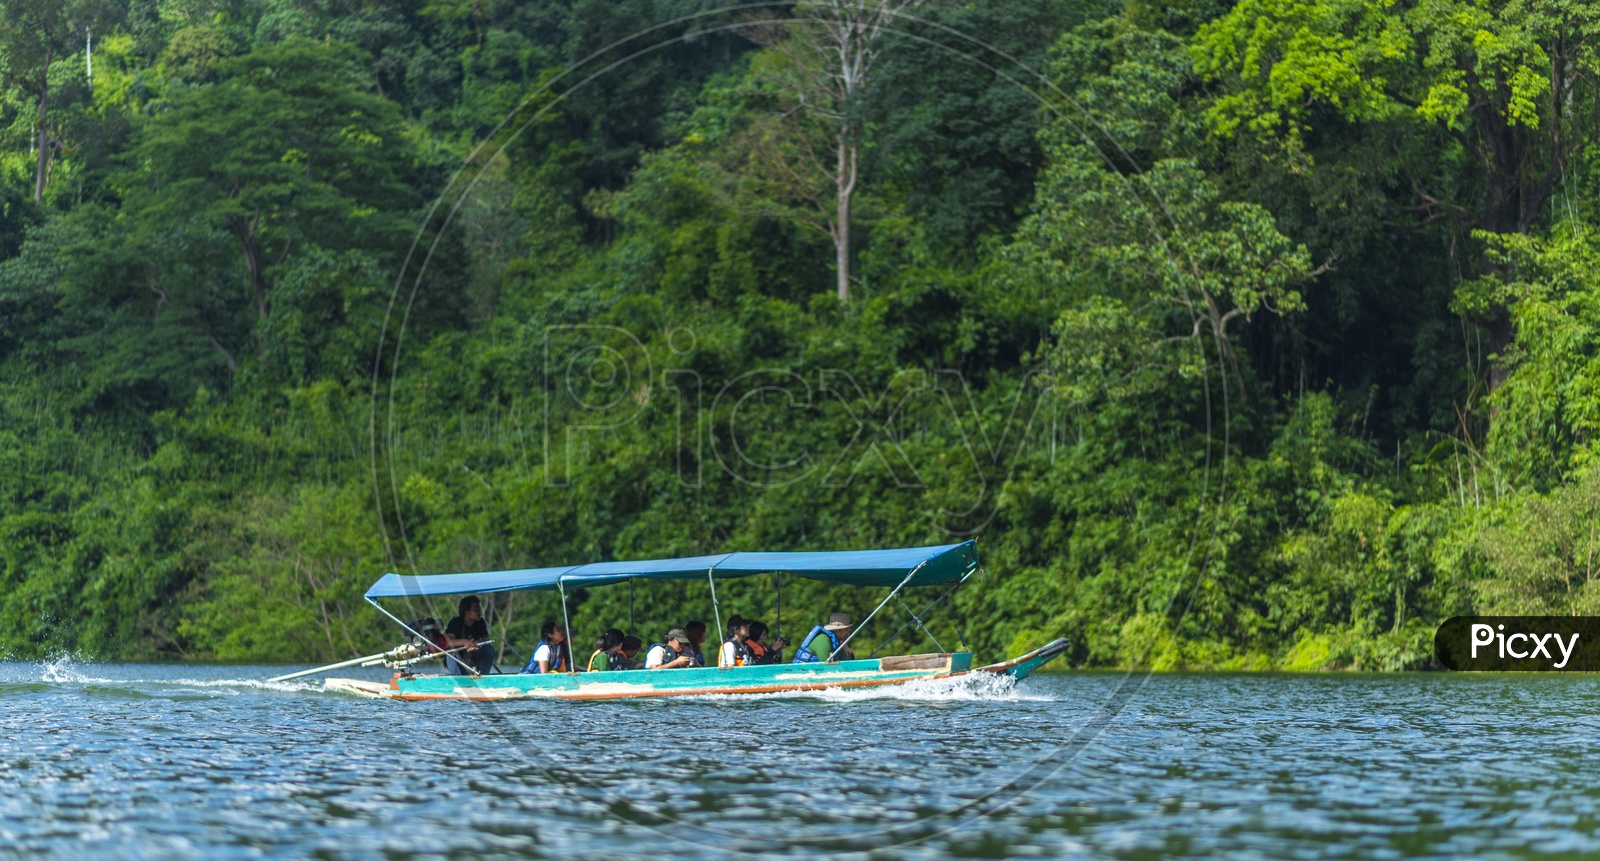 Tourists In Boats At Khao Yai National Park , Thailand